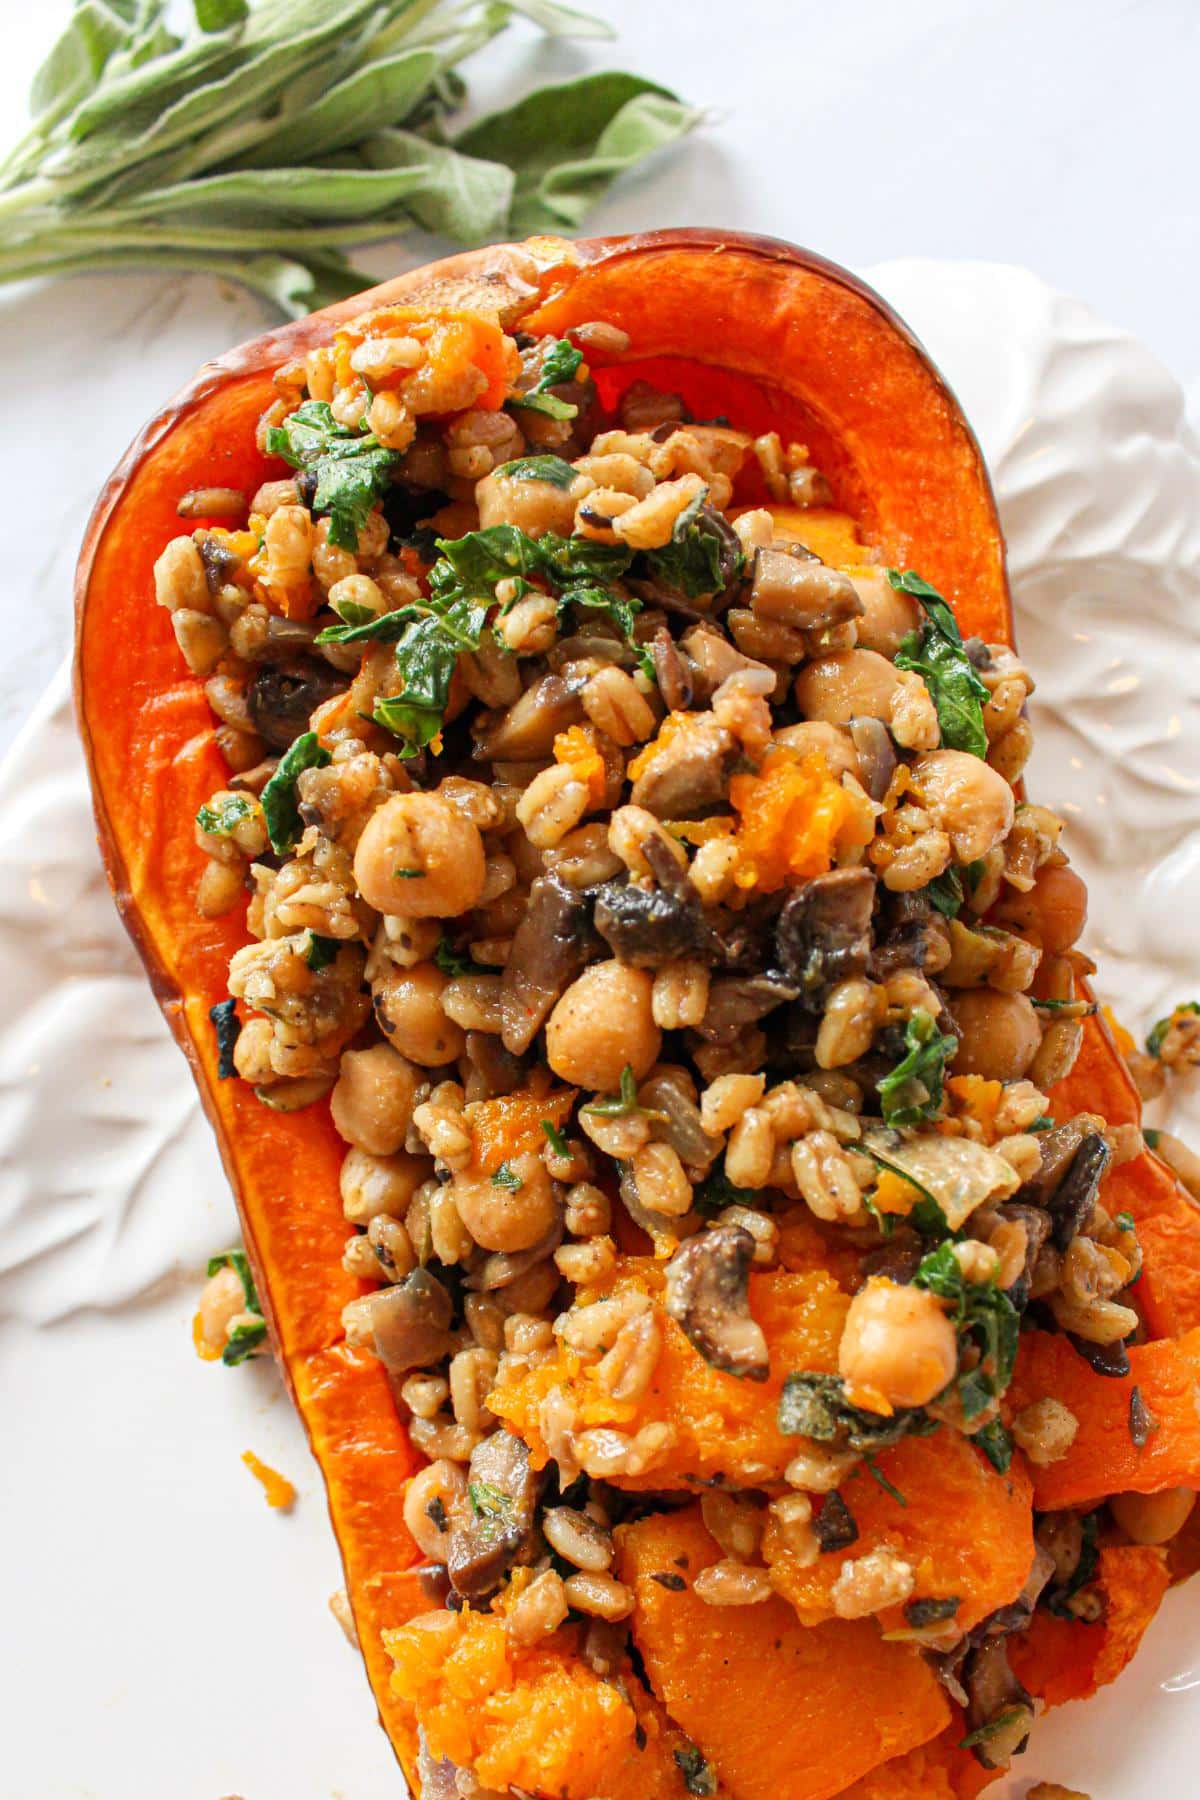 Vegan stuffed butternut squash on a serving dish with grains, mushrooms and chickpeas